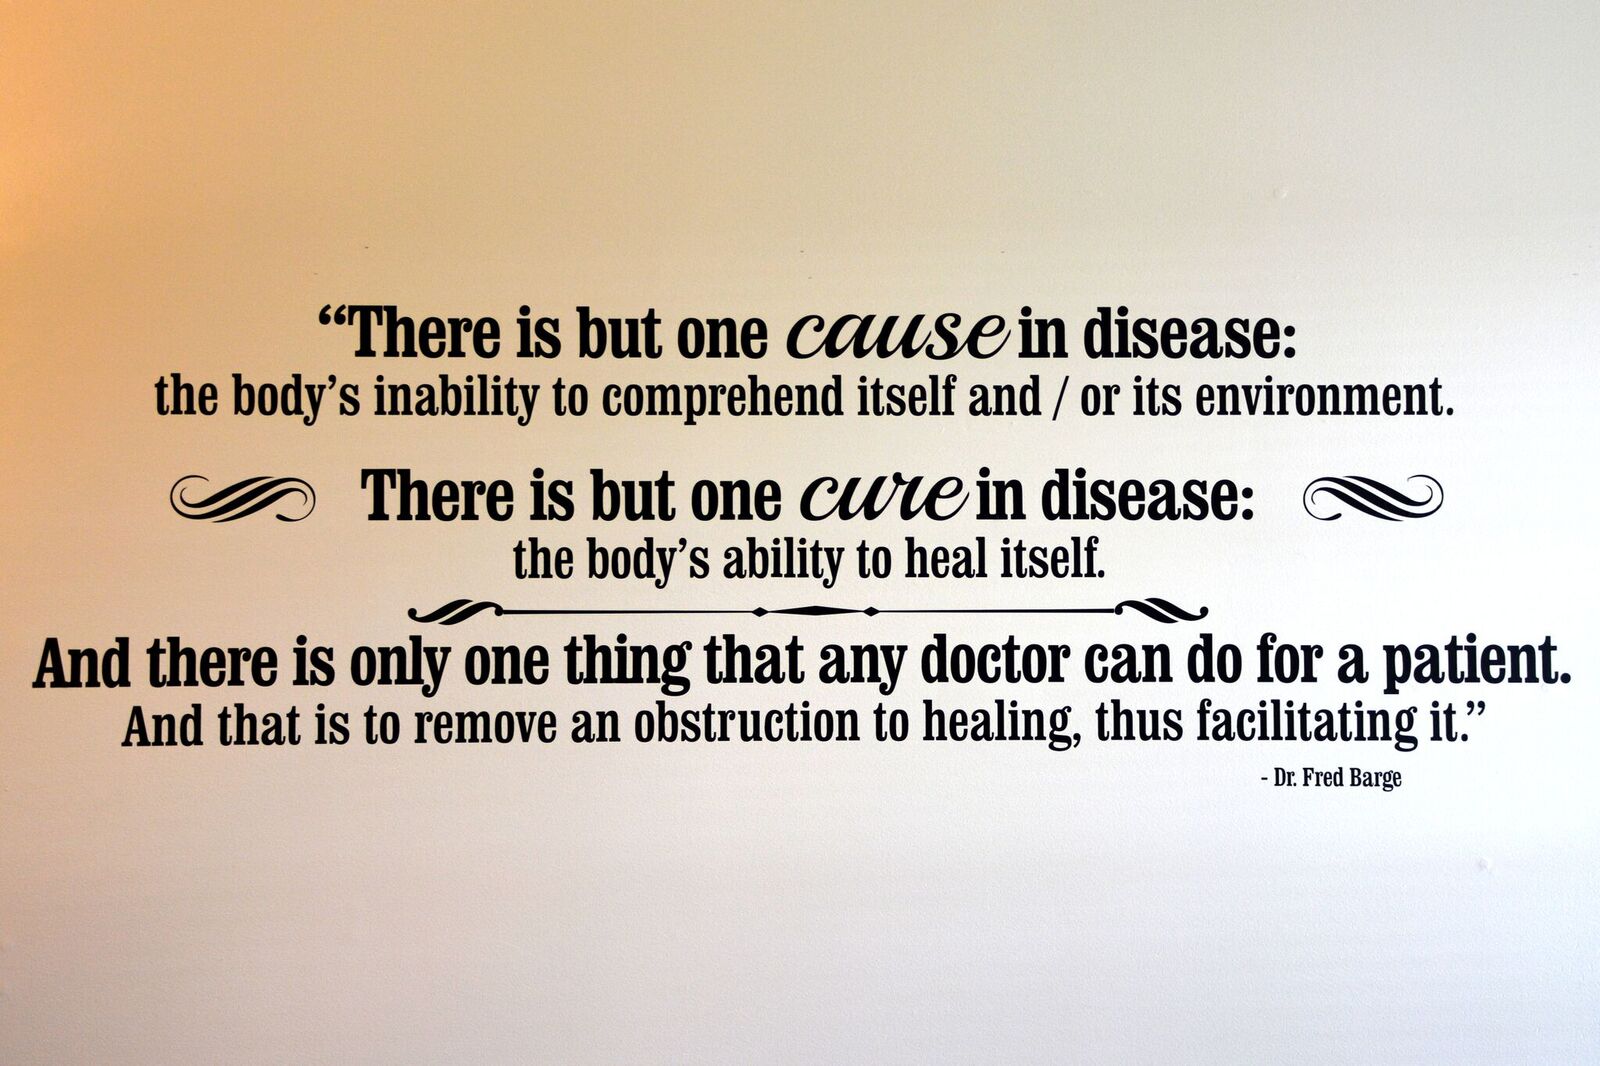 There is but one cause in disease: the body's inability to comprehend itself and/or its environment. There is but one cure in disease: the body's ability to heal itself. And there is only one thing that any doctor can do for a patient. And that is to remove an obstruction to healing, thus facilitating it. - Dr. Fred Barge